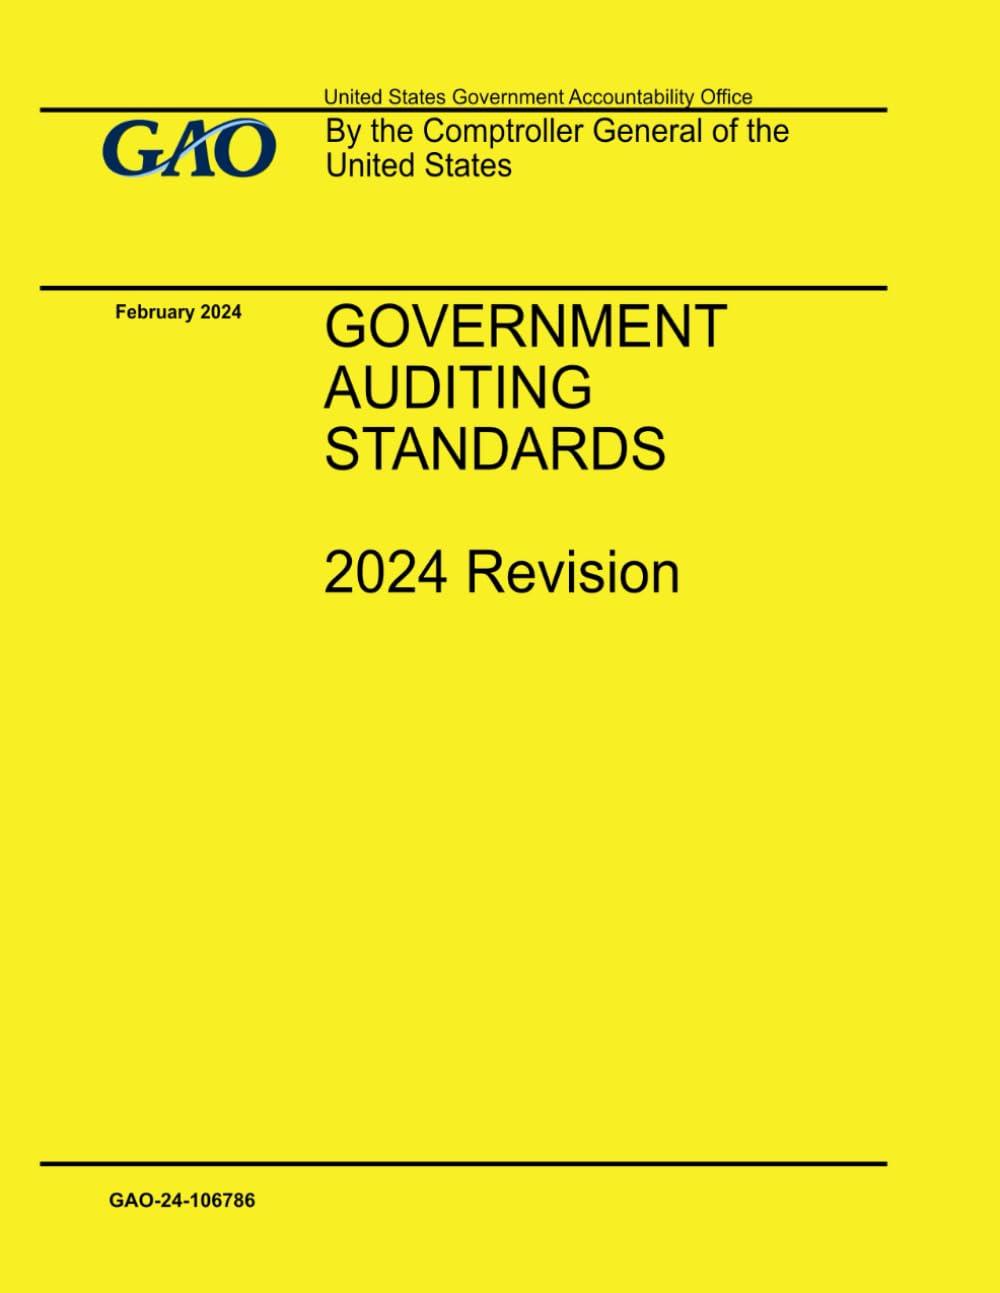 Government Auditing Standards 2024 Revision